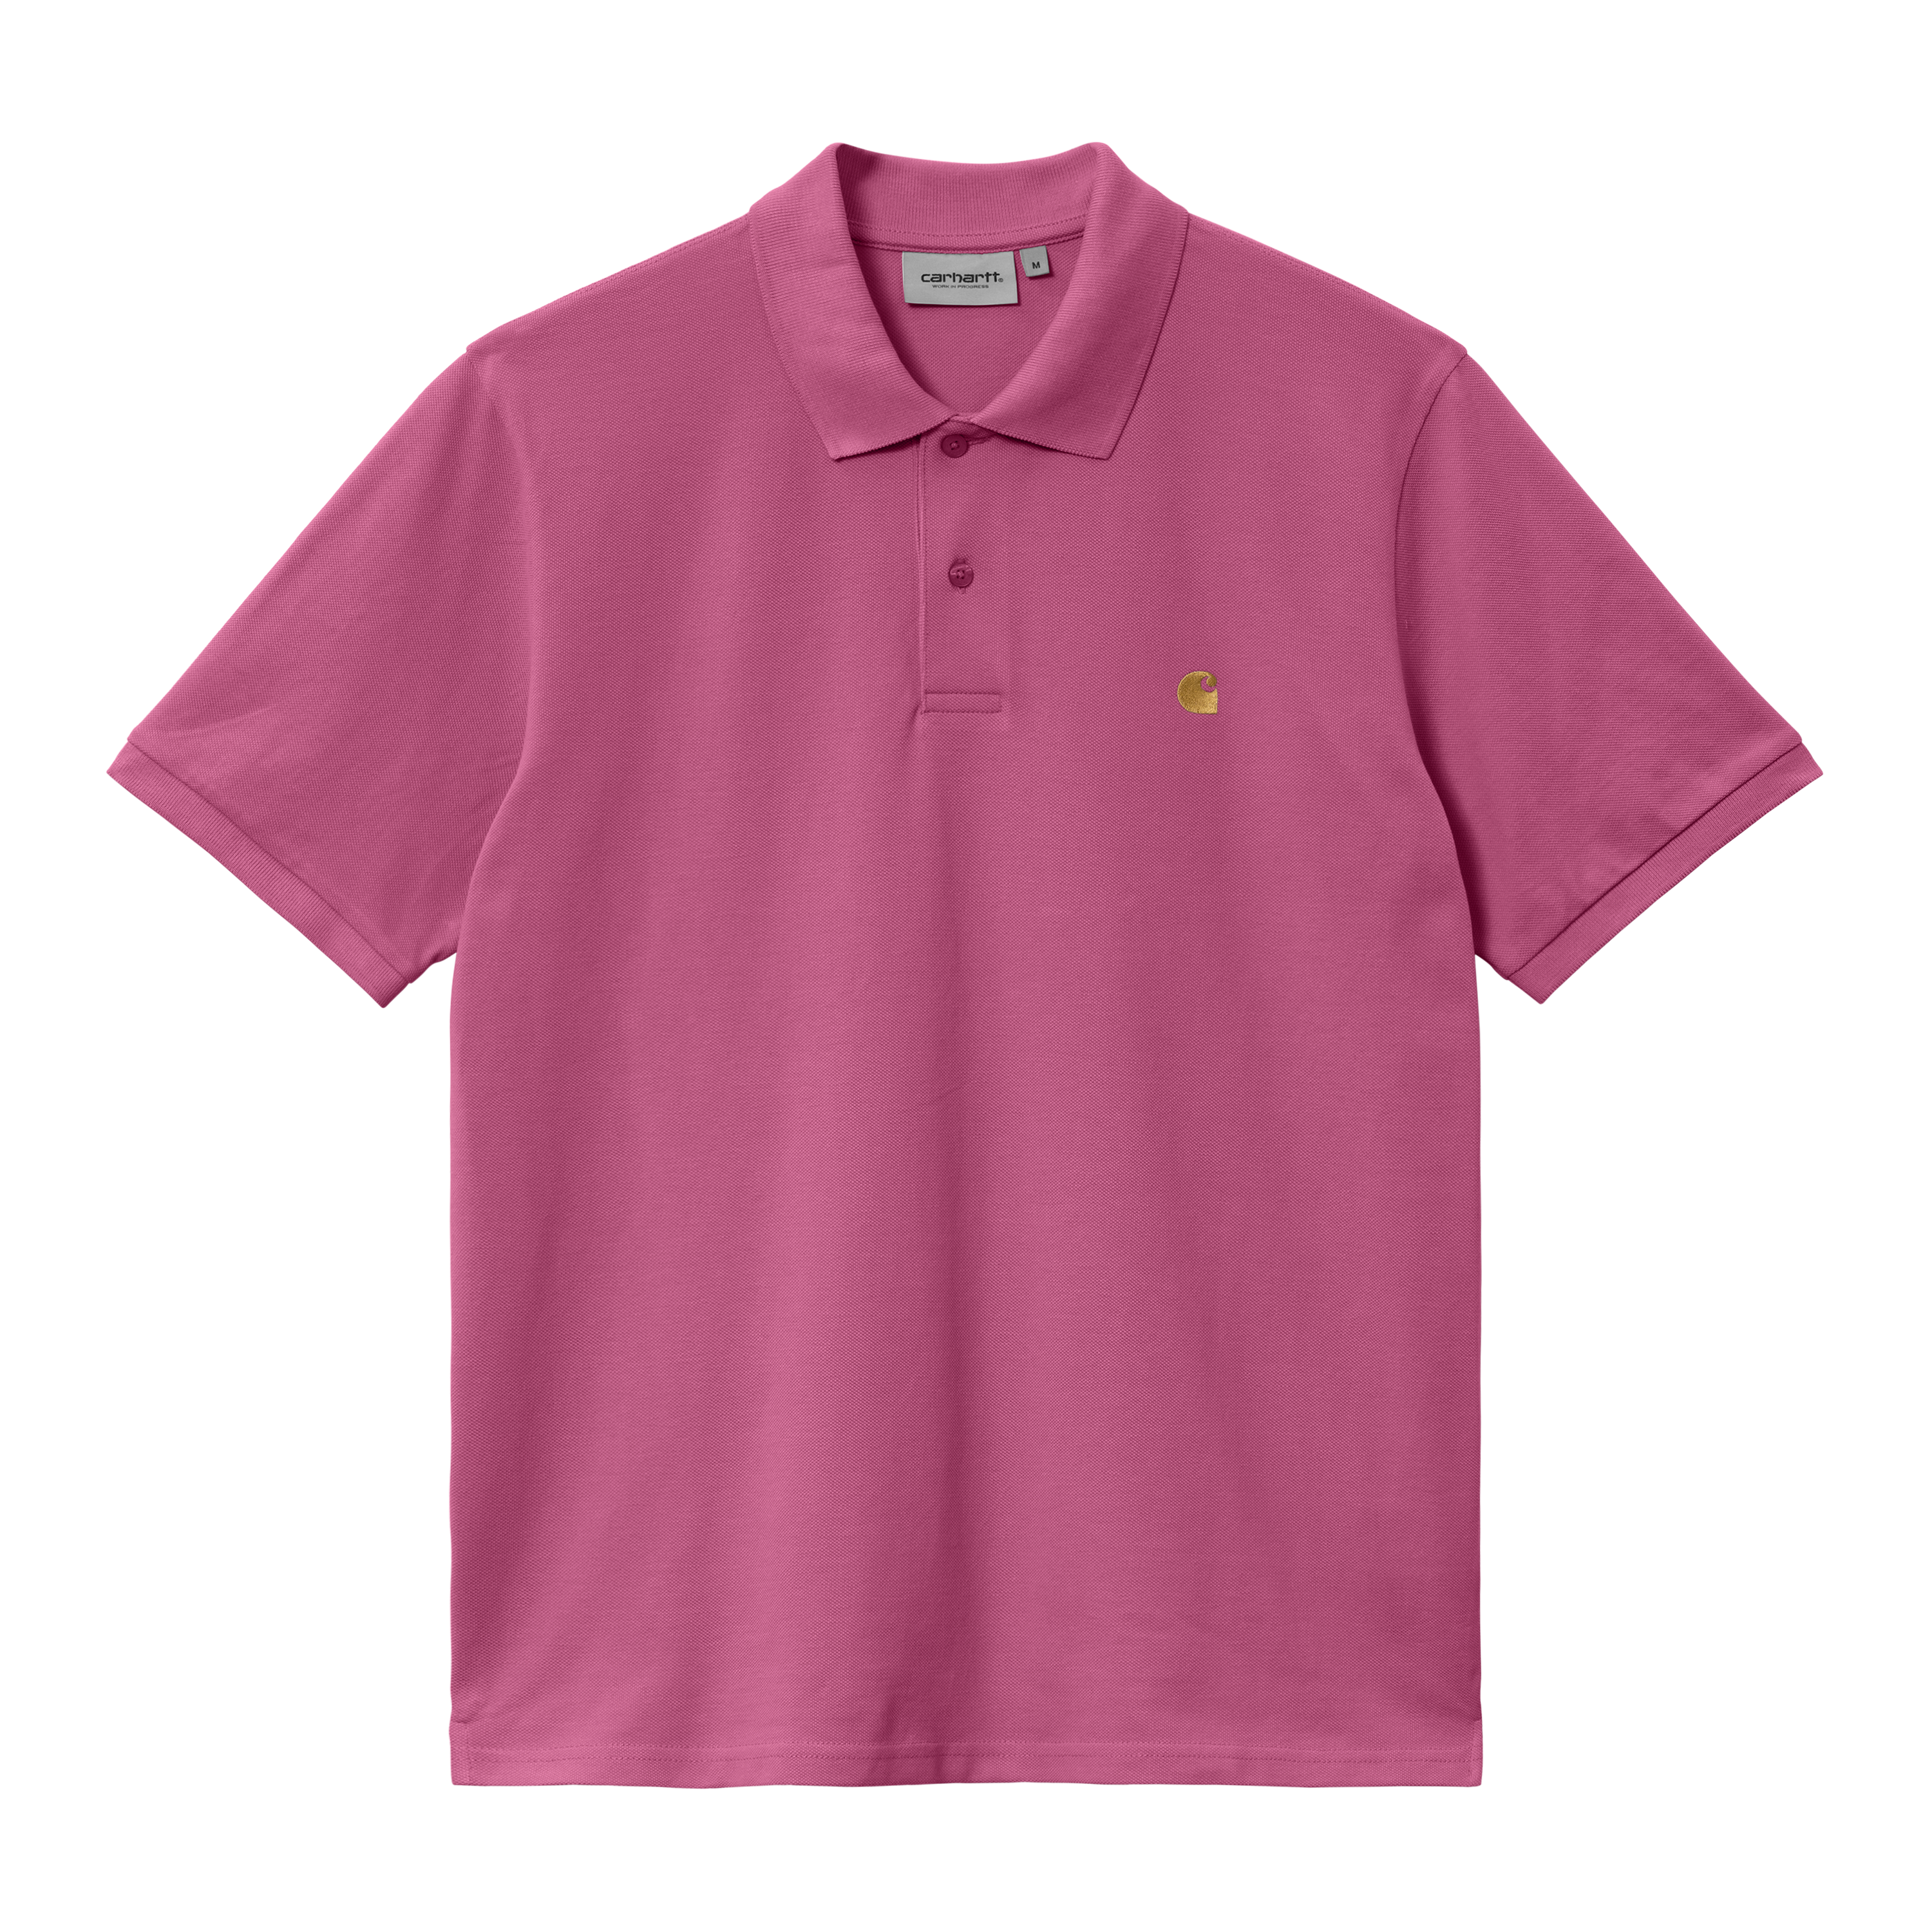 Carhartt WIP Short Sleeve Chase Pique Polo in Pink